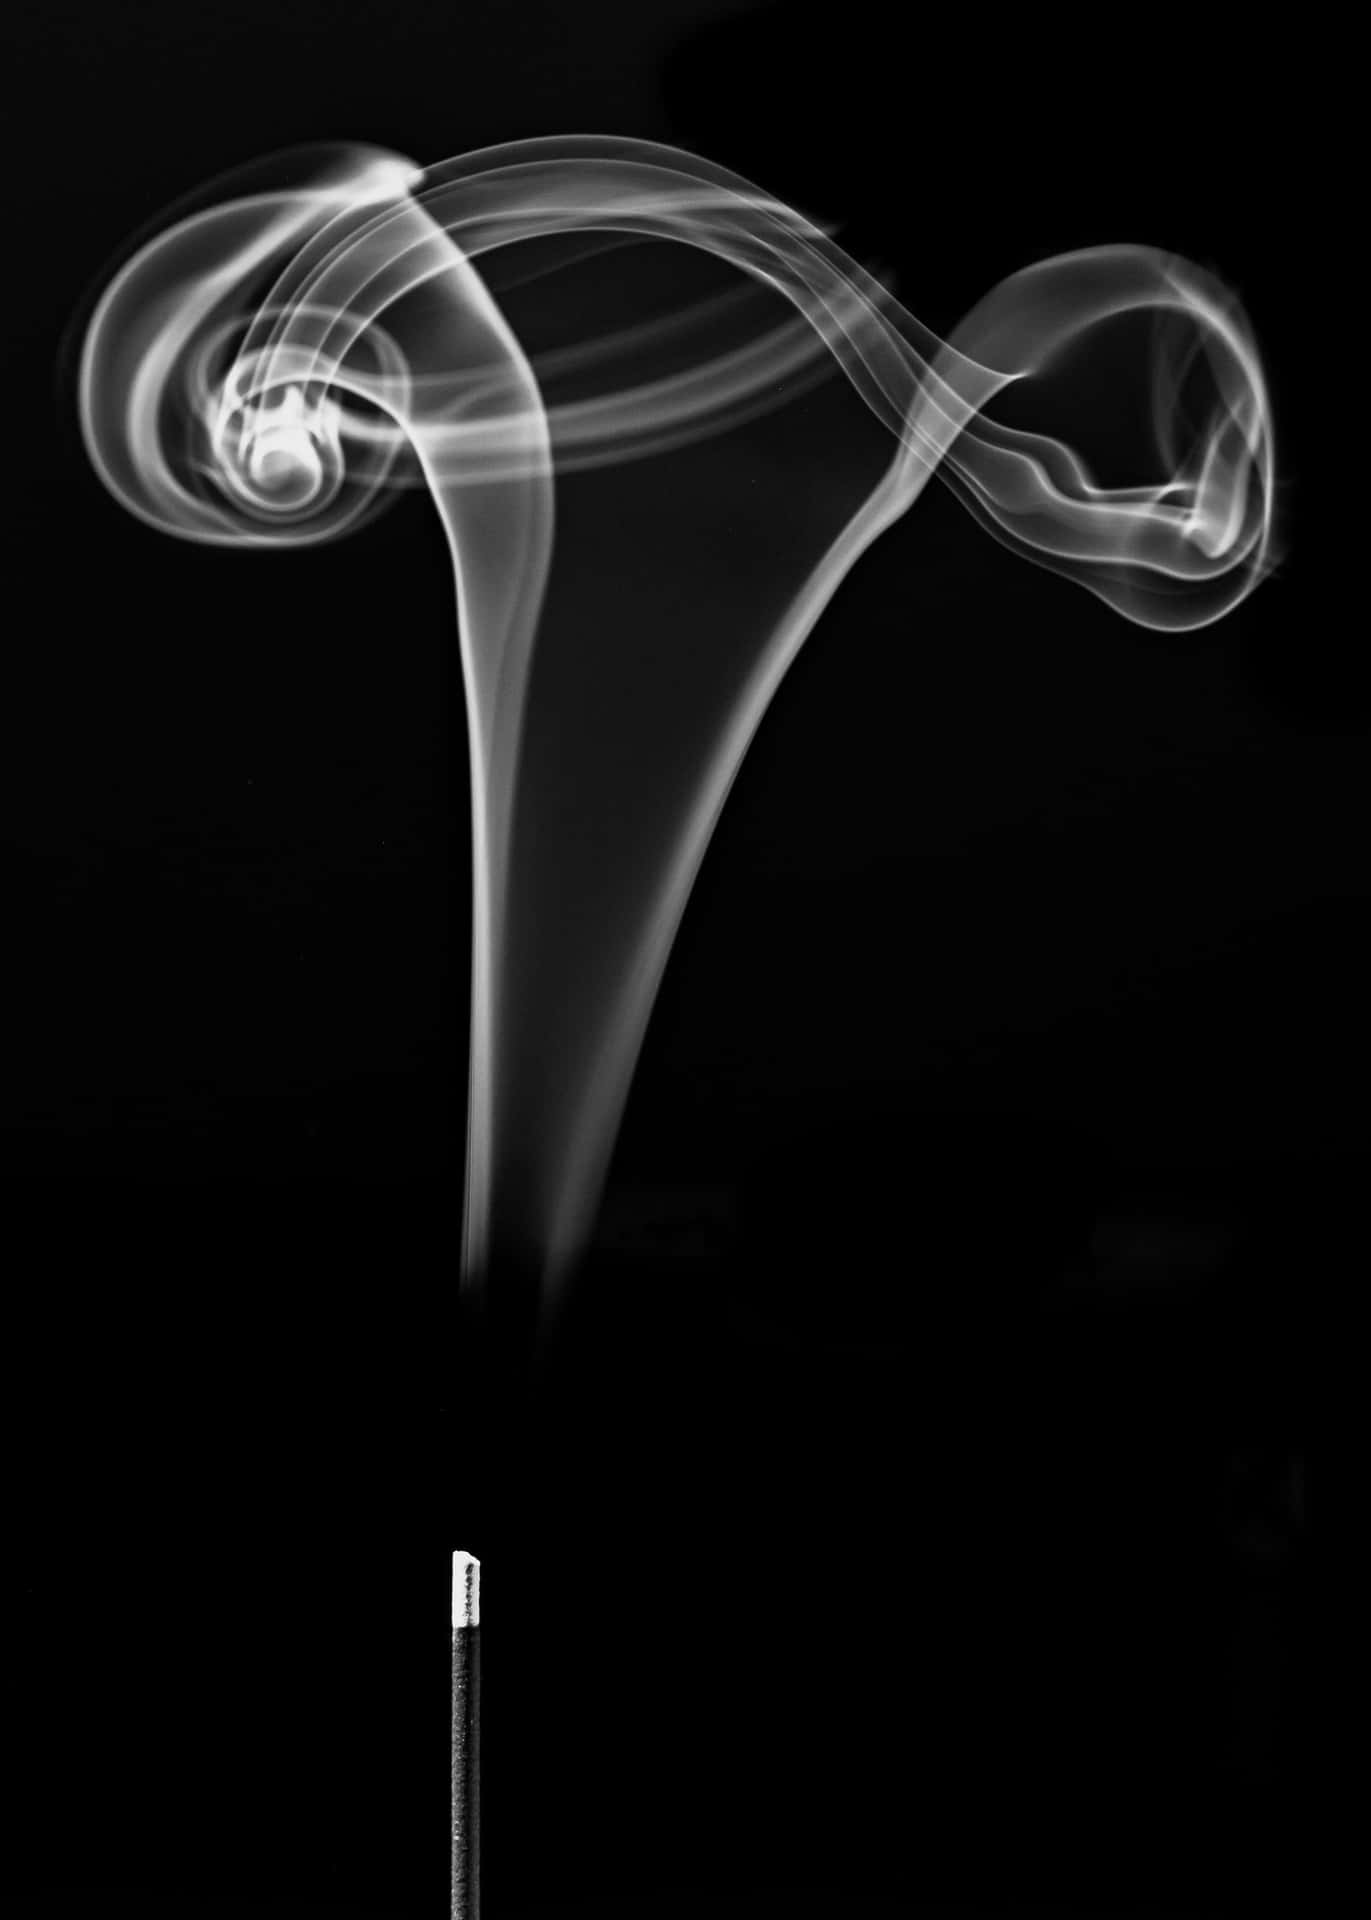 "Let your smoke flow through life's obstacles" Wallpaper